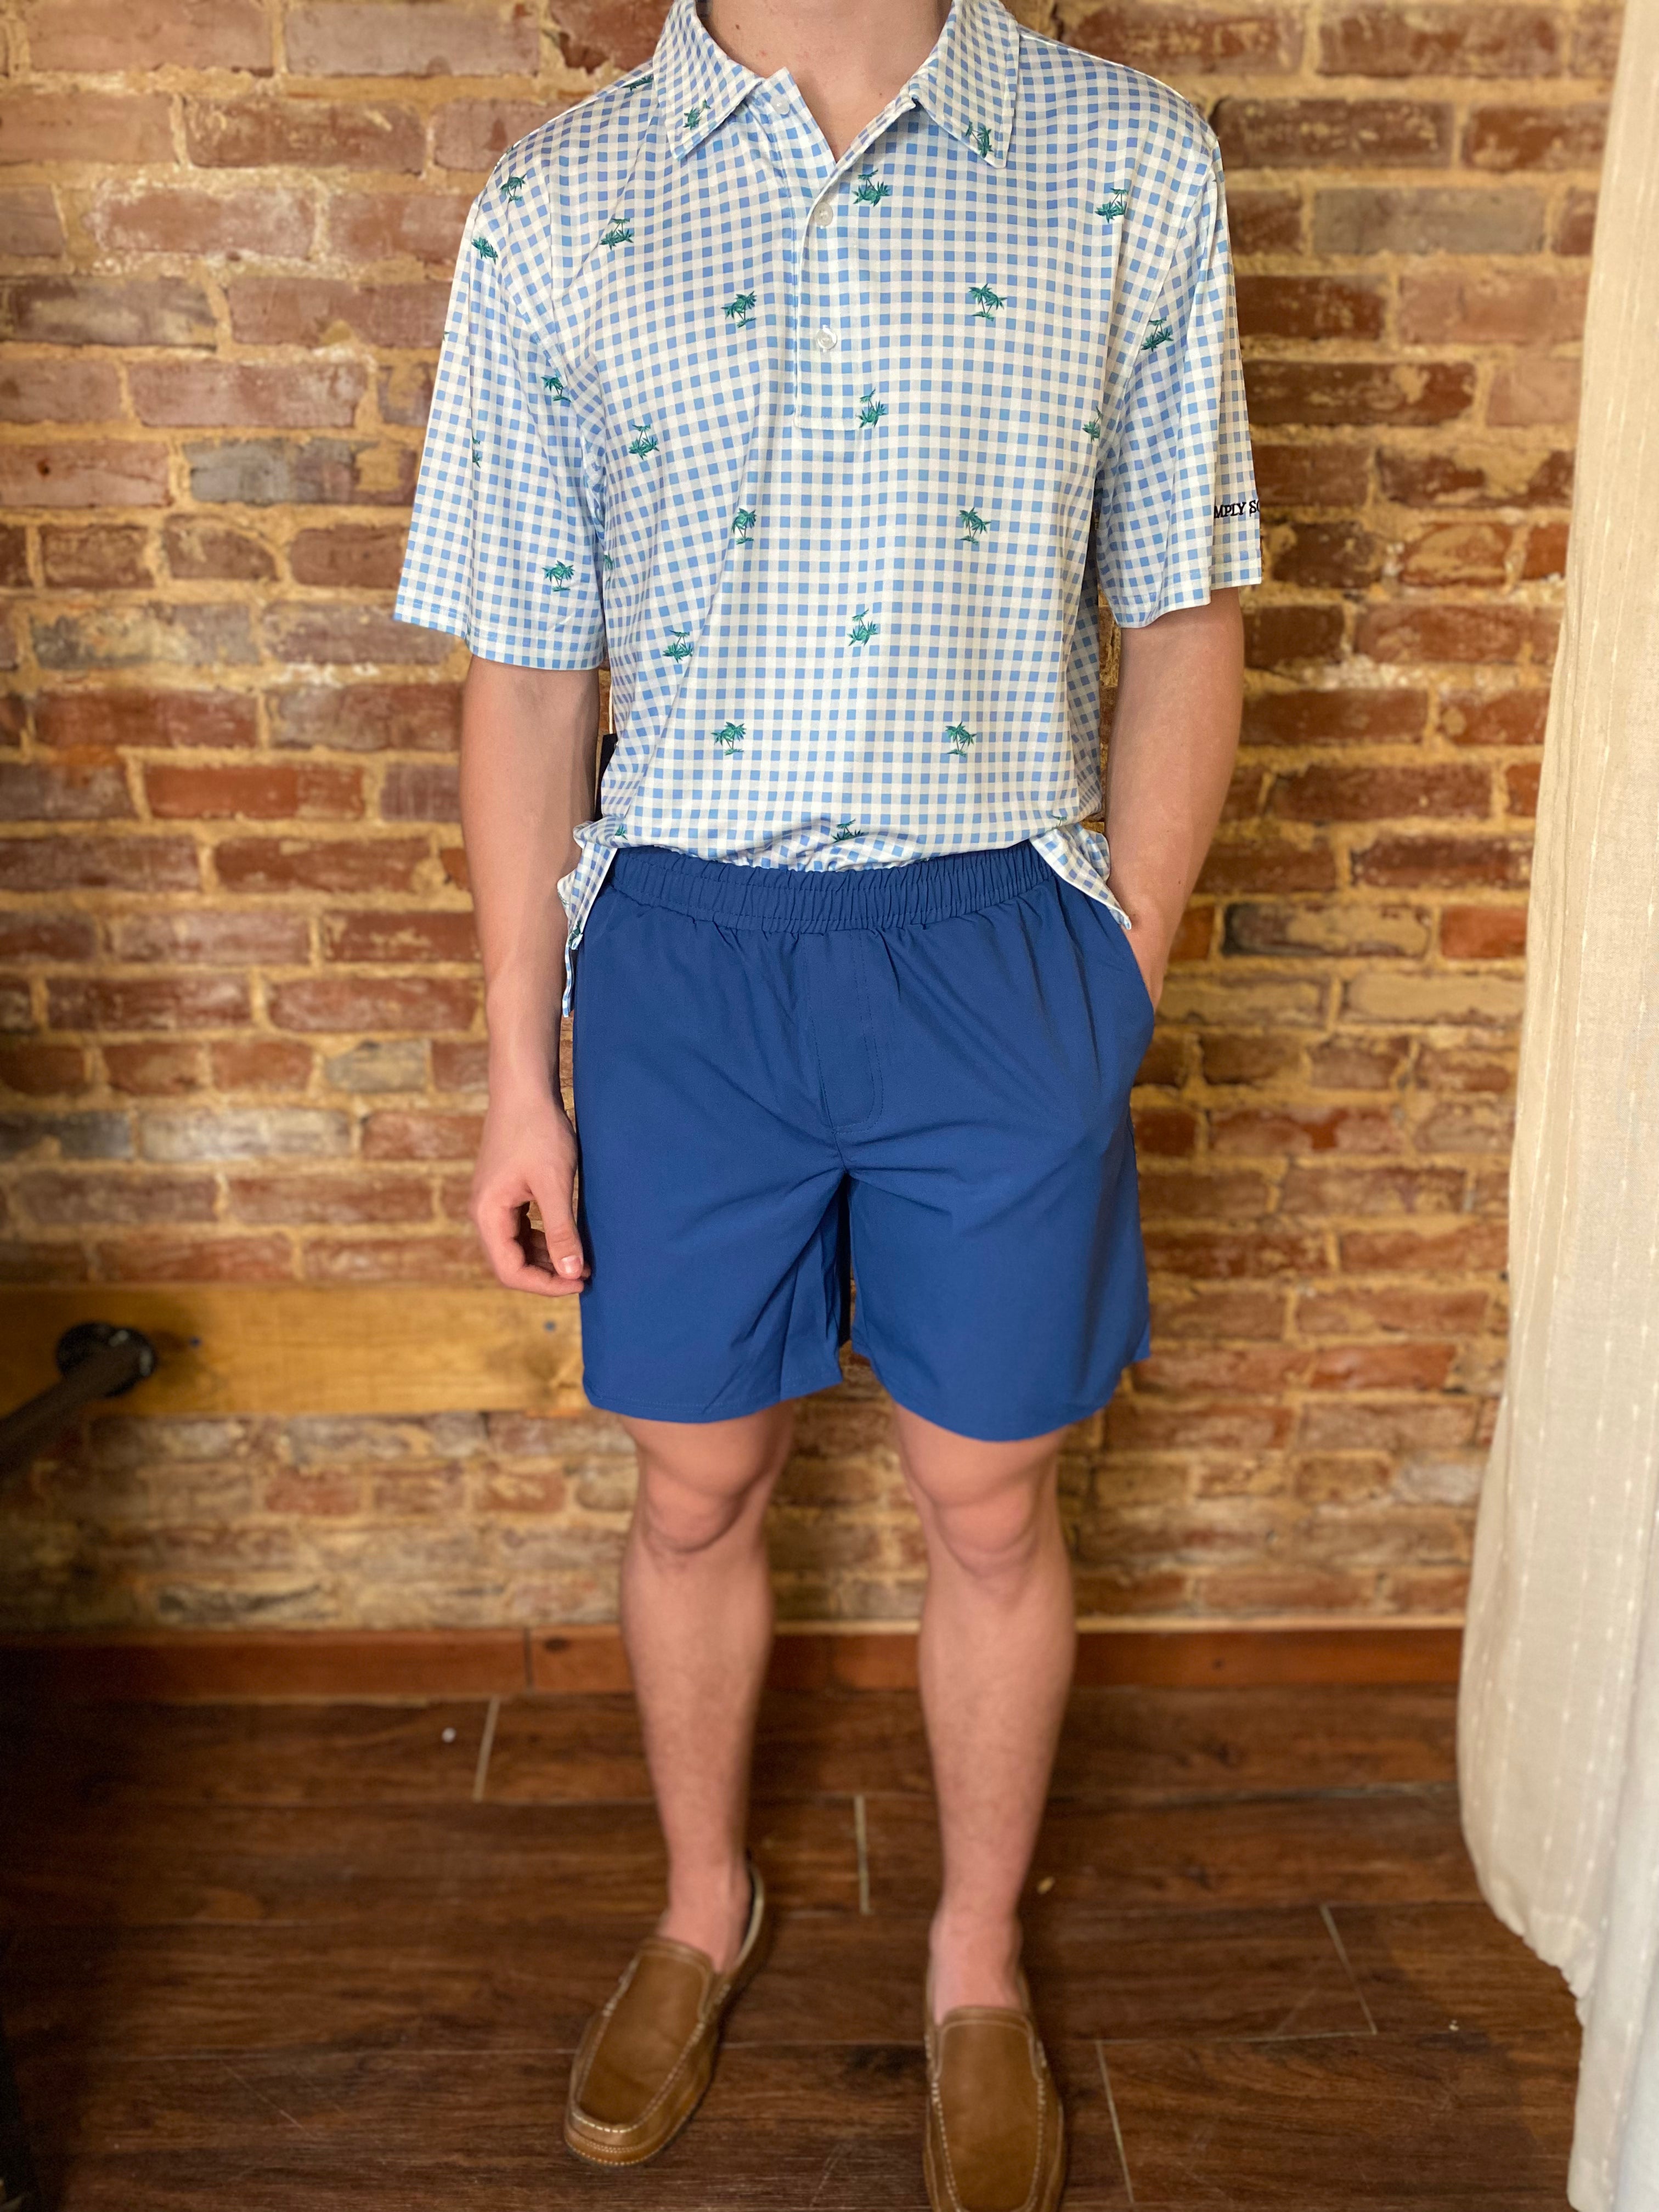 Southern Sleek Lined Navy Dry Fit Simply Southern Shorts